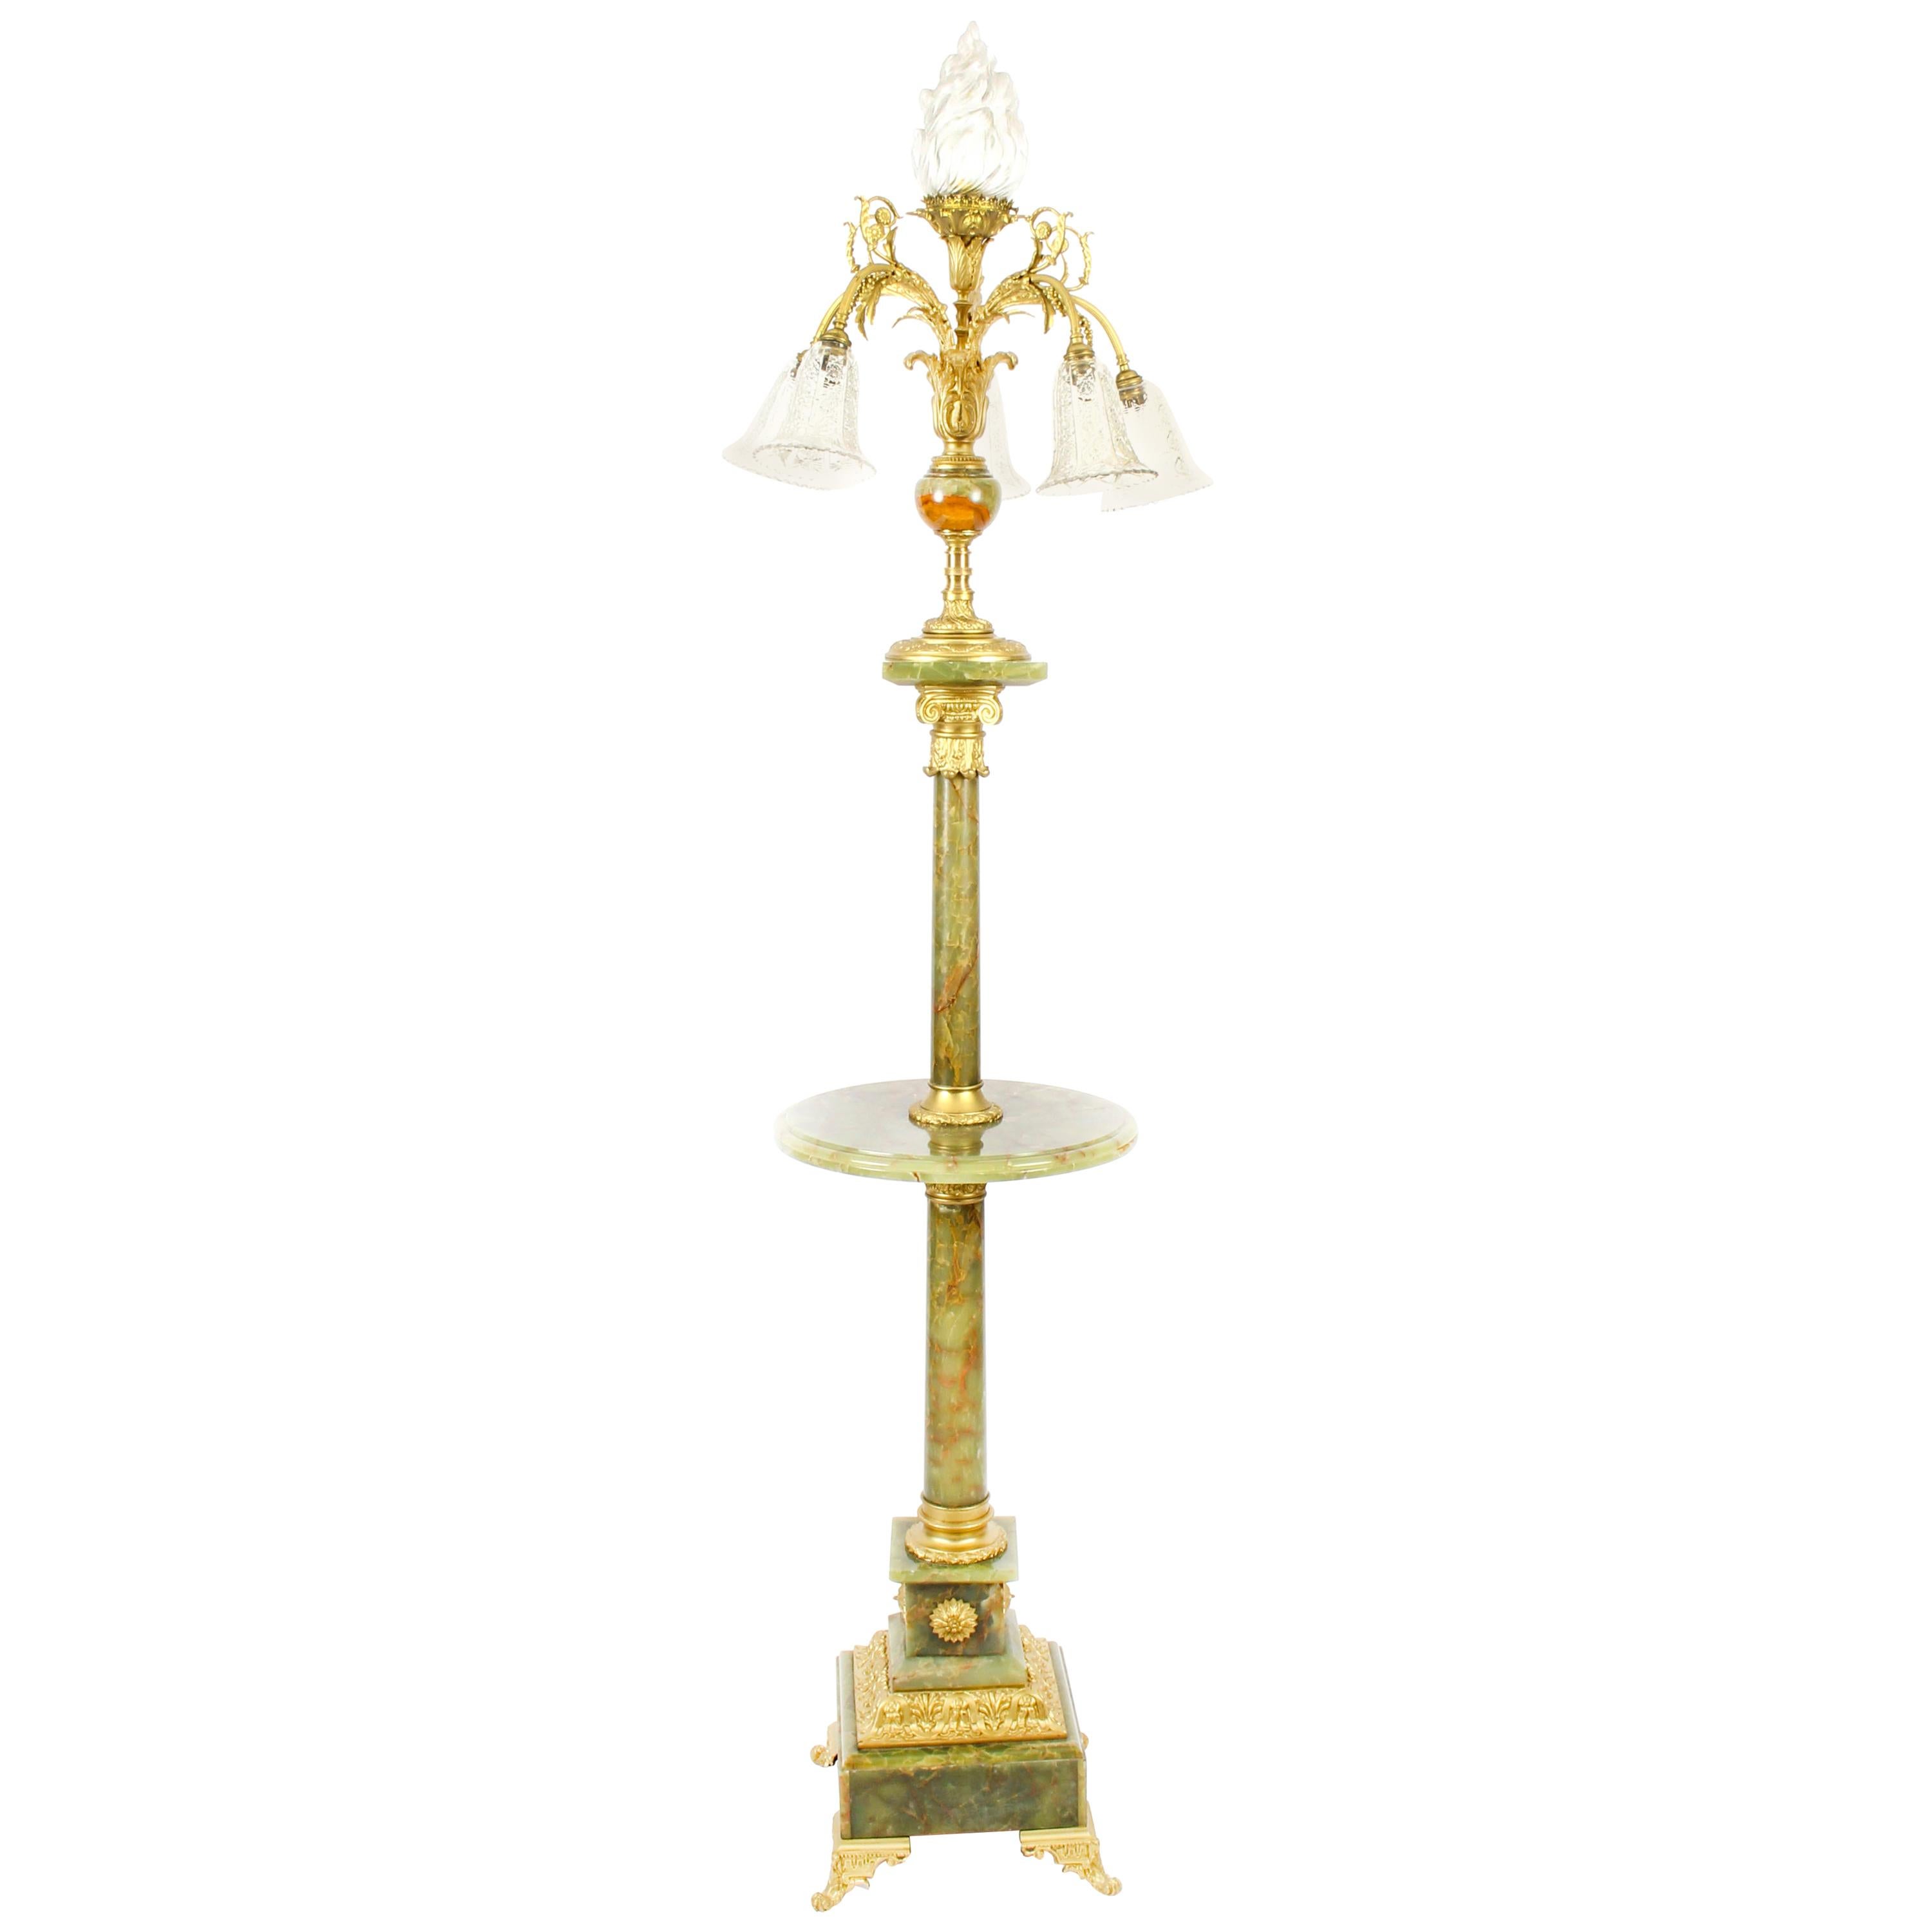 Antique Onyx and Ormolu Floor Standard Lamp Louis Revival, Early 20th Century